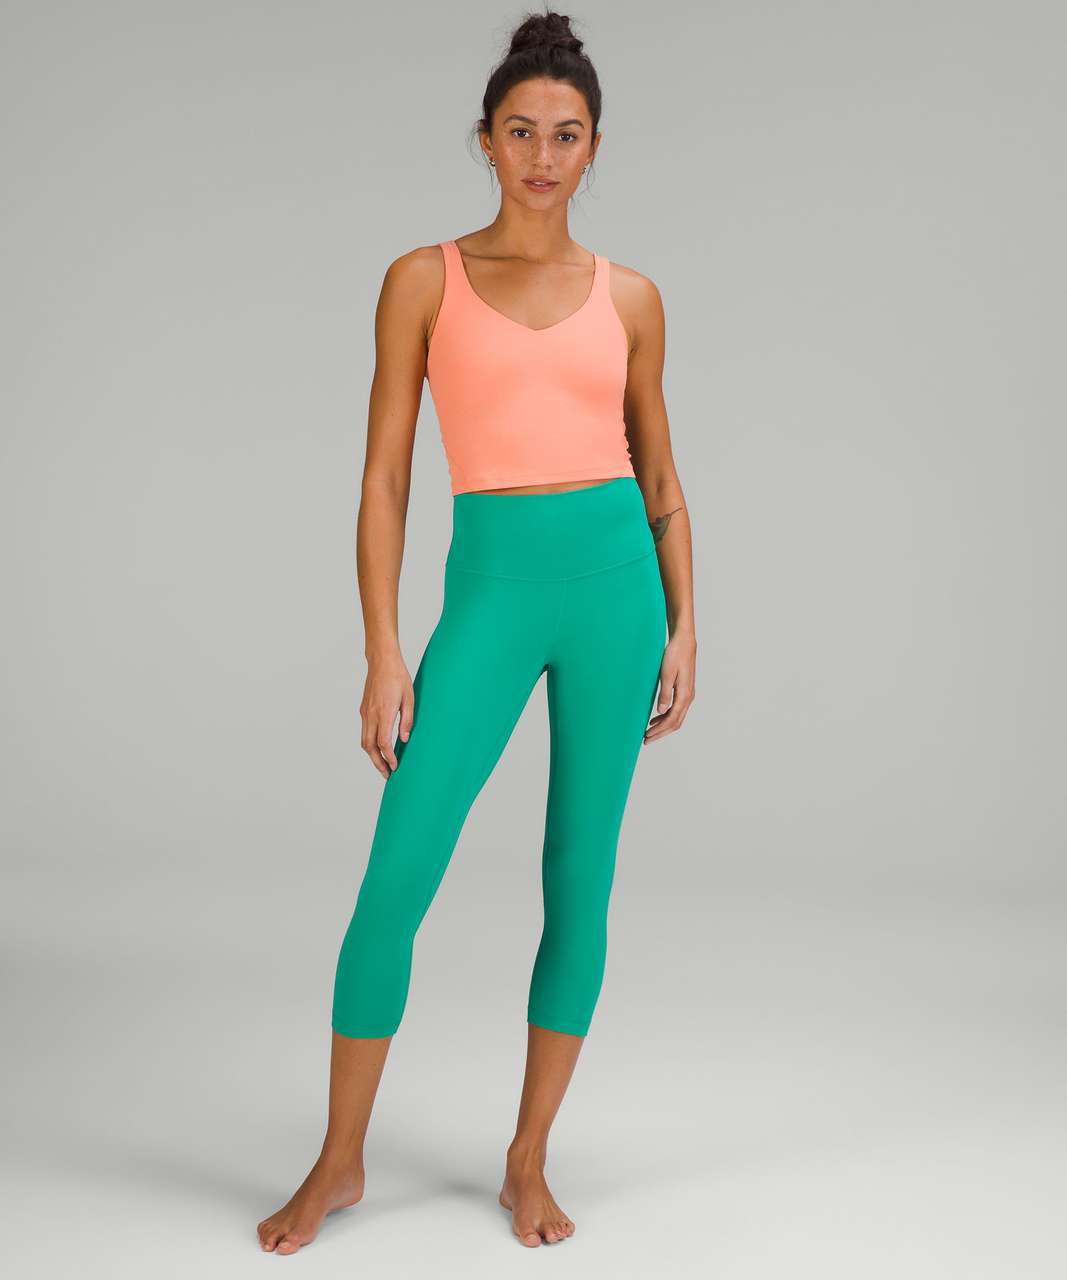 Lululemon Align Ribbed Tank Top - Sunny Coral